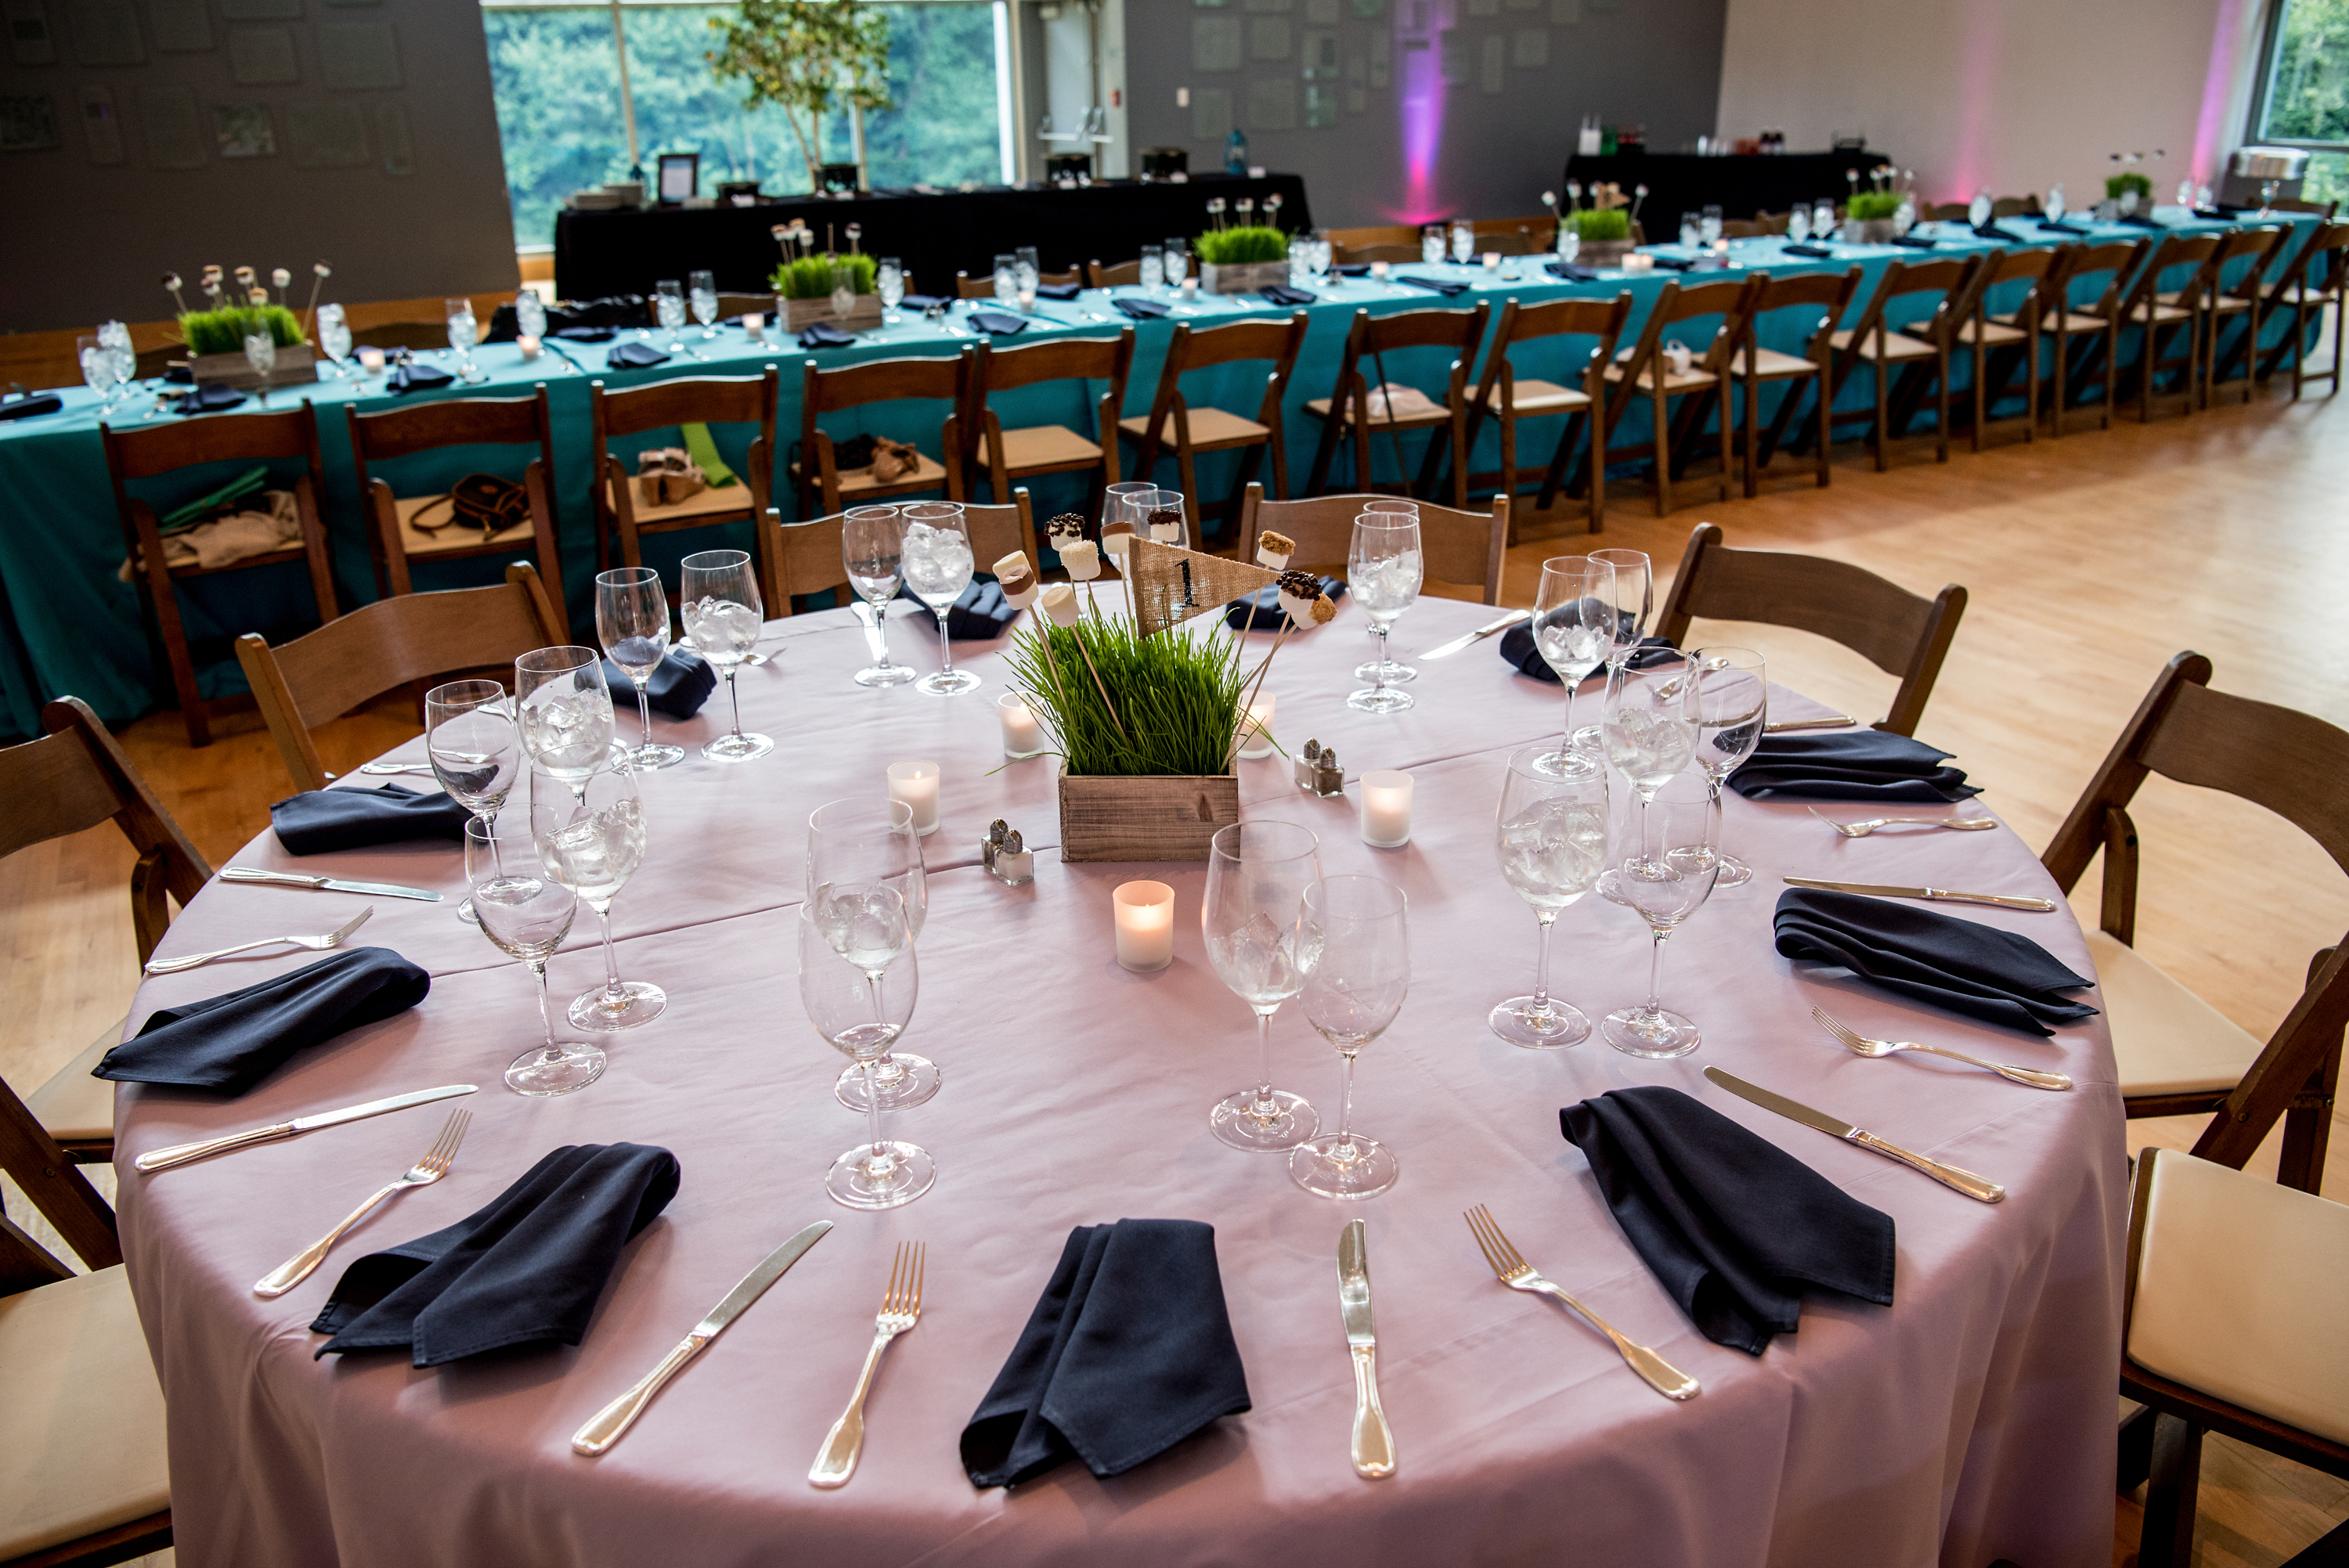 Colorful Tables with Rustic Wheatgrass and Marshmallow Centerpiece for Camp Color War Bat Mitzvah at Temple Rodef Shalom in Falls Church, VA | Pop Color Events | Adding a Pop of Color to Bar & Bat Mitzvahs in DC, MD & VA | Photo by Greg Land Photography 